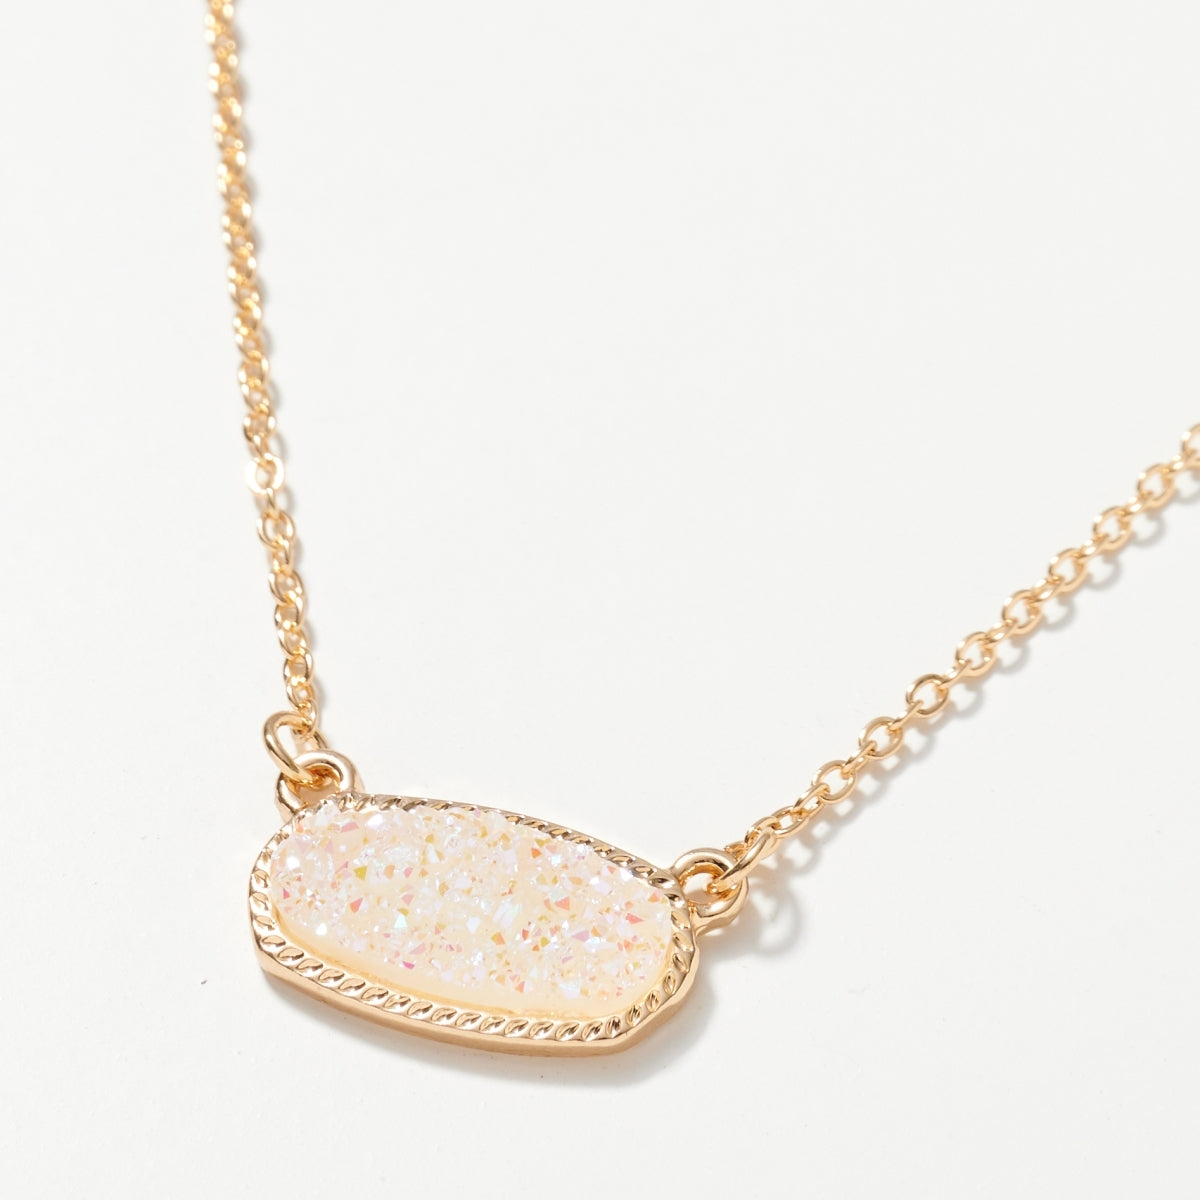 Dainty Oval Druzy Pendant Necklace & Earring Set - Abalone on Gold